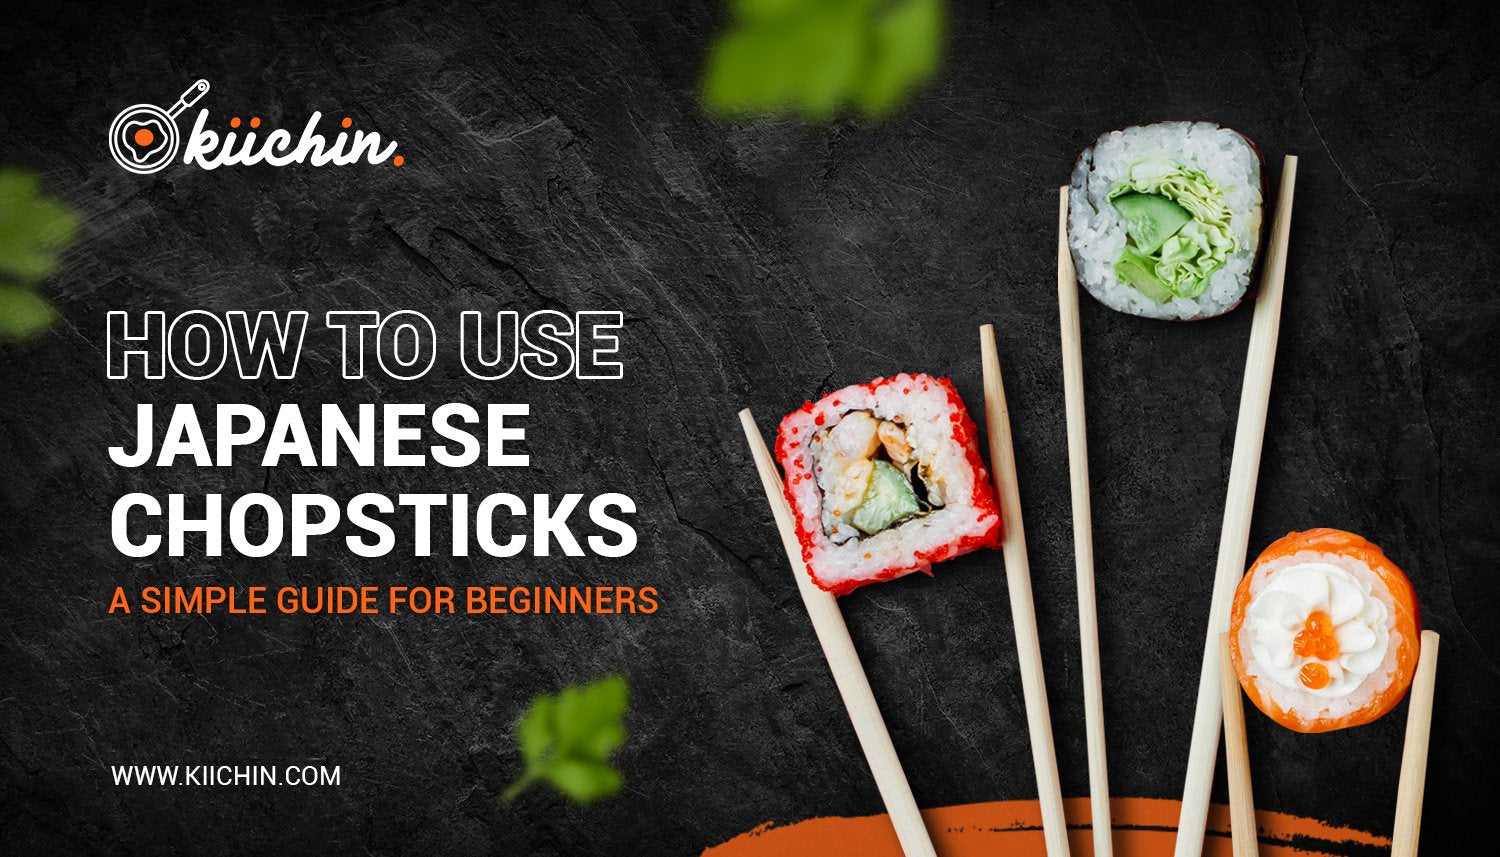 How To Use Japanese Chopsticks: A Simple Guide For Beginners